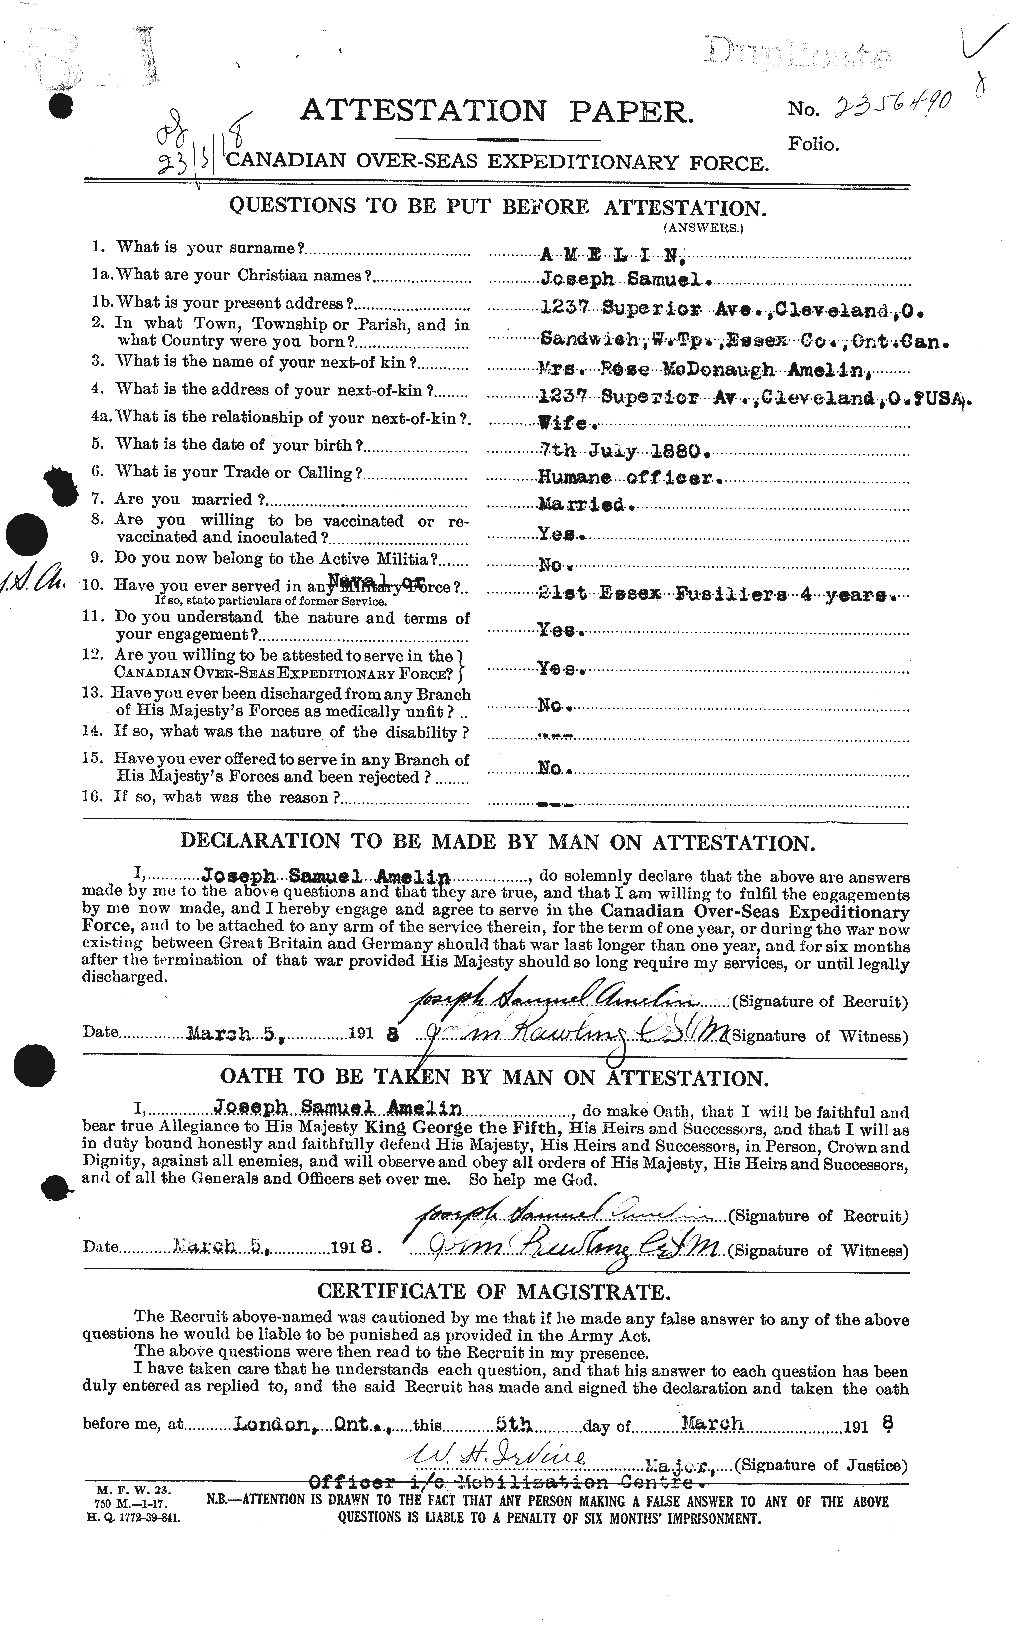 Personnel Records of the First World War - CEF 208906a